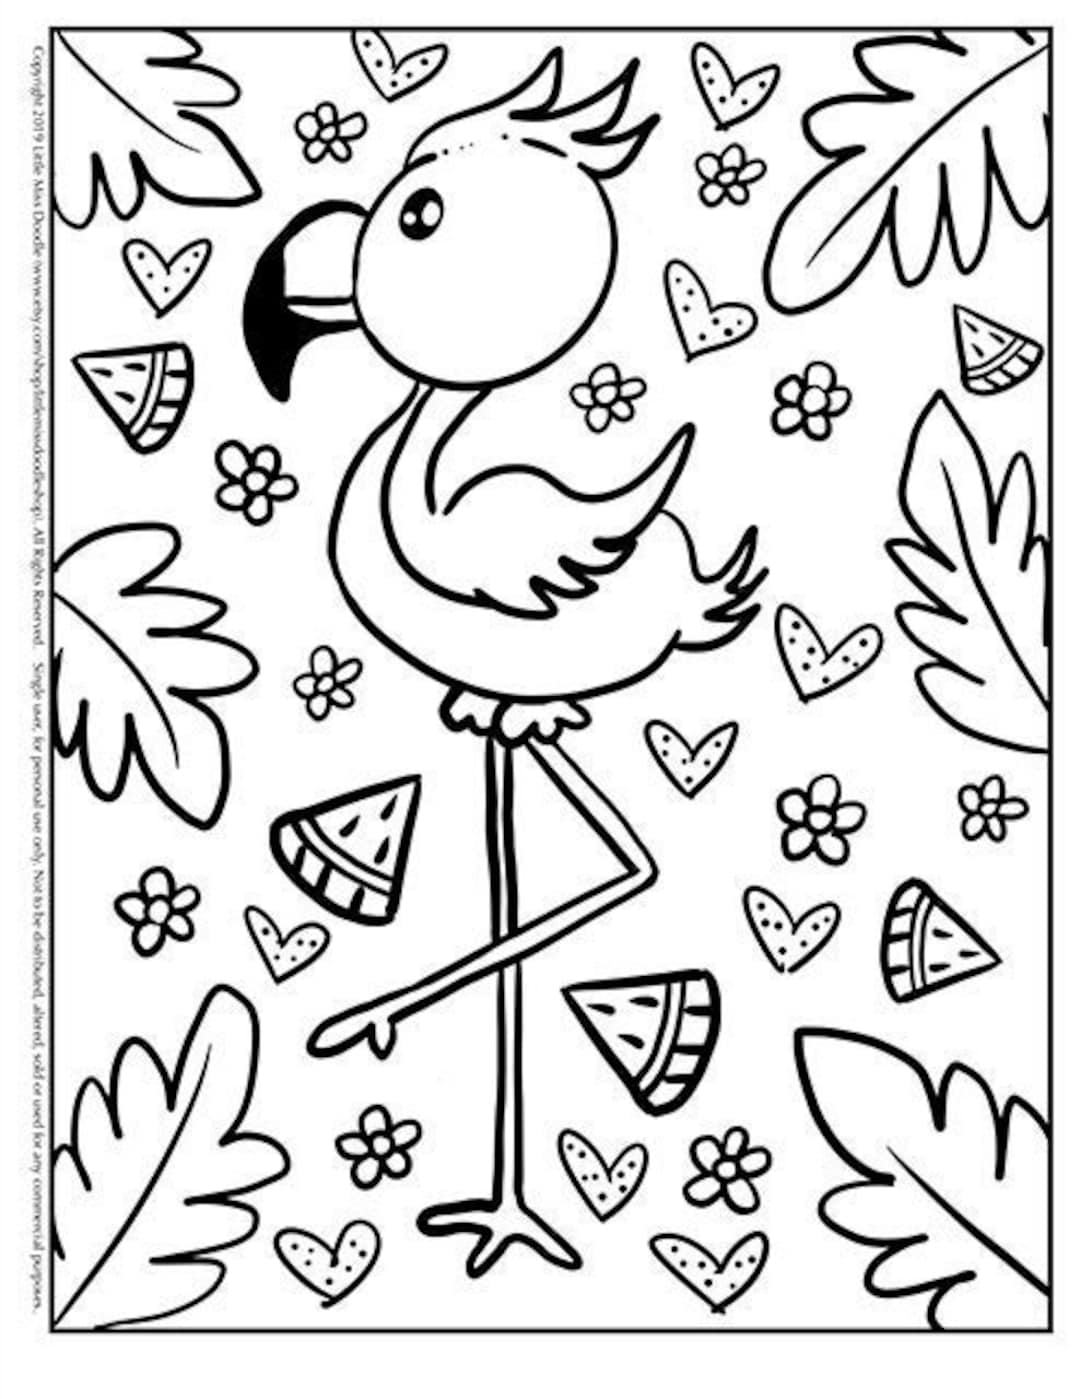 Summer time flamingo doodle printable cute kawaii coloring page for kids and adults instant download